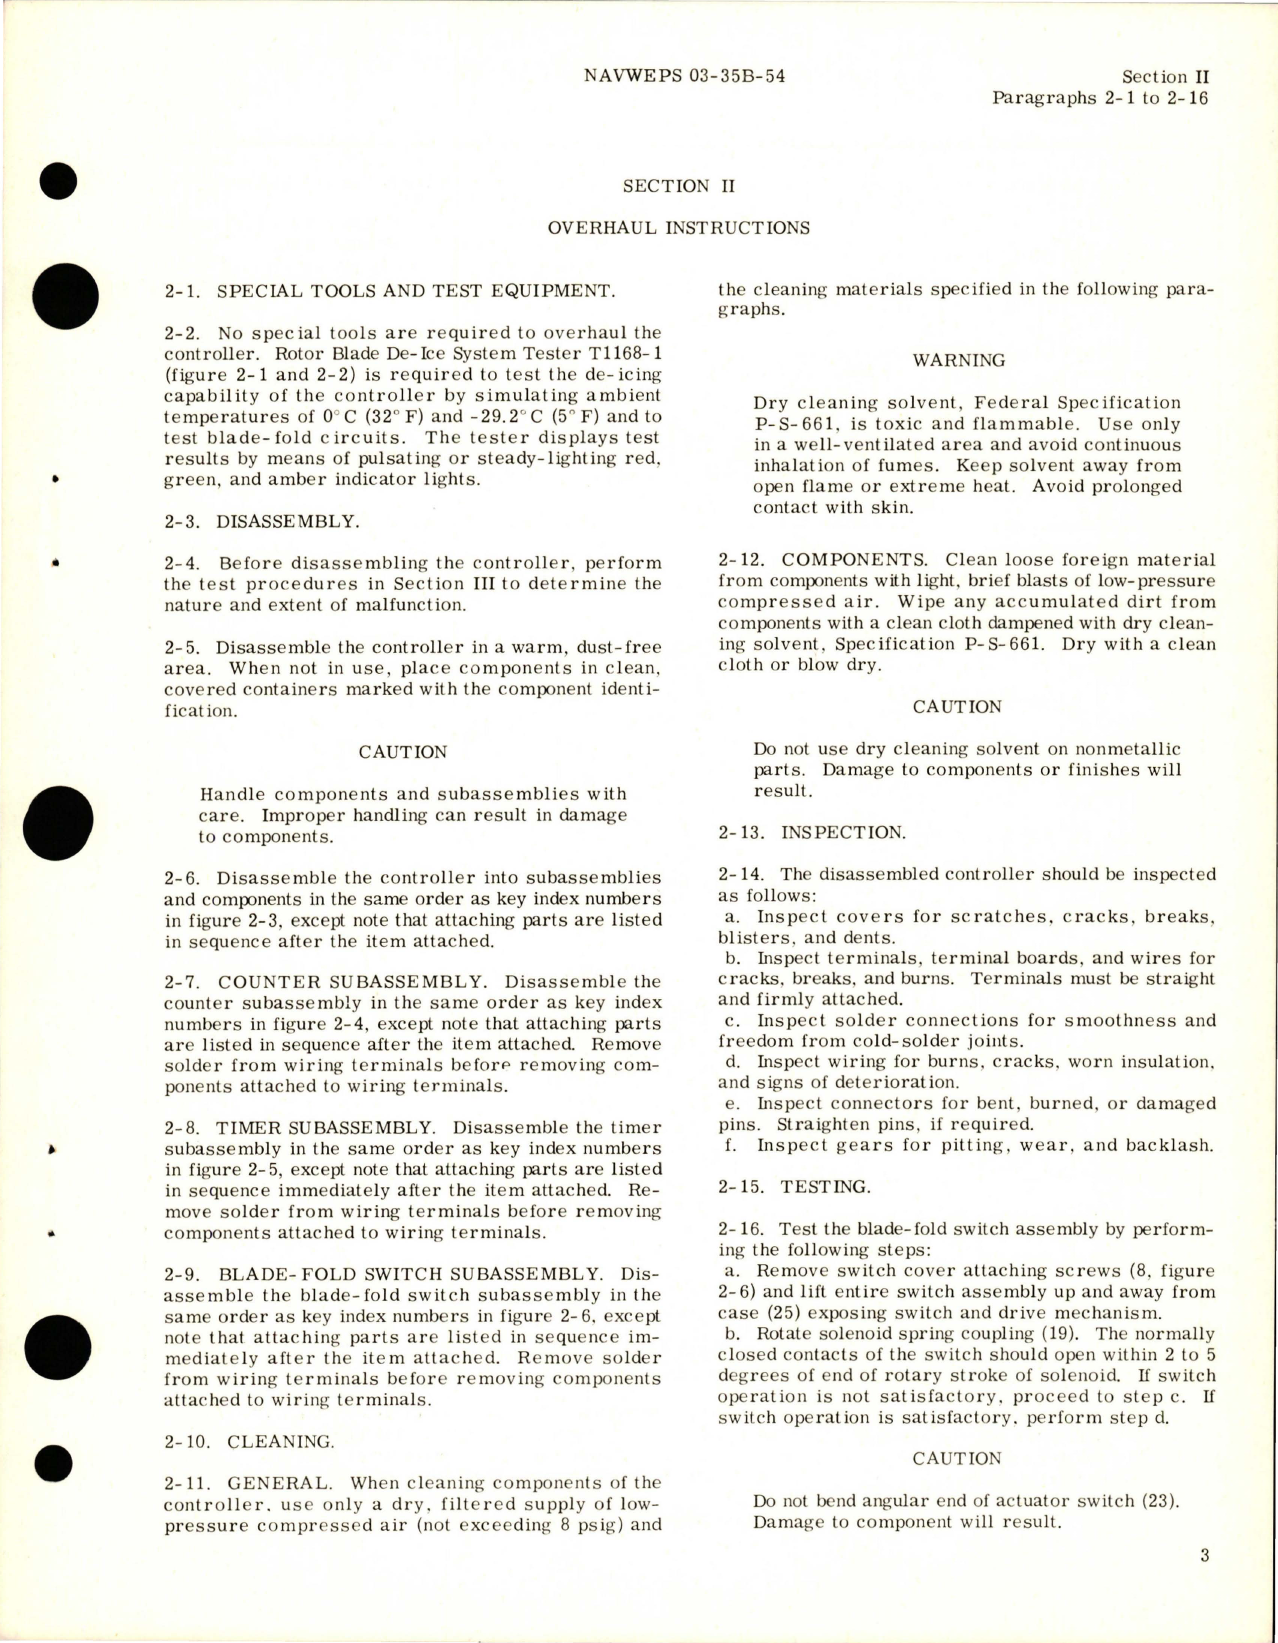 Sample page 5 from AirCorps Library document: Overhaul Instructions for Master De-Icing Controller - Part A628-1A